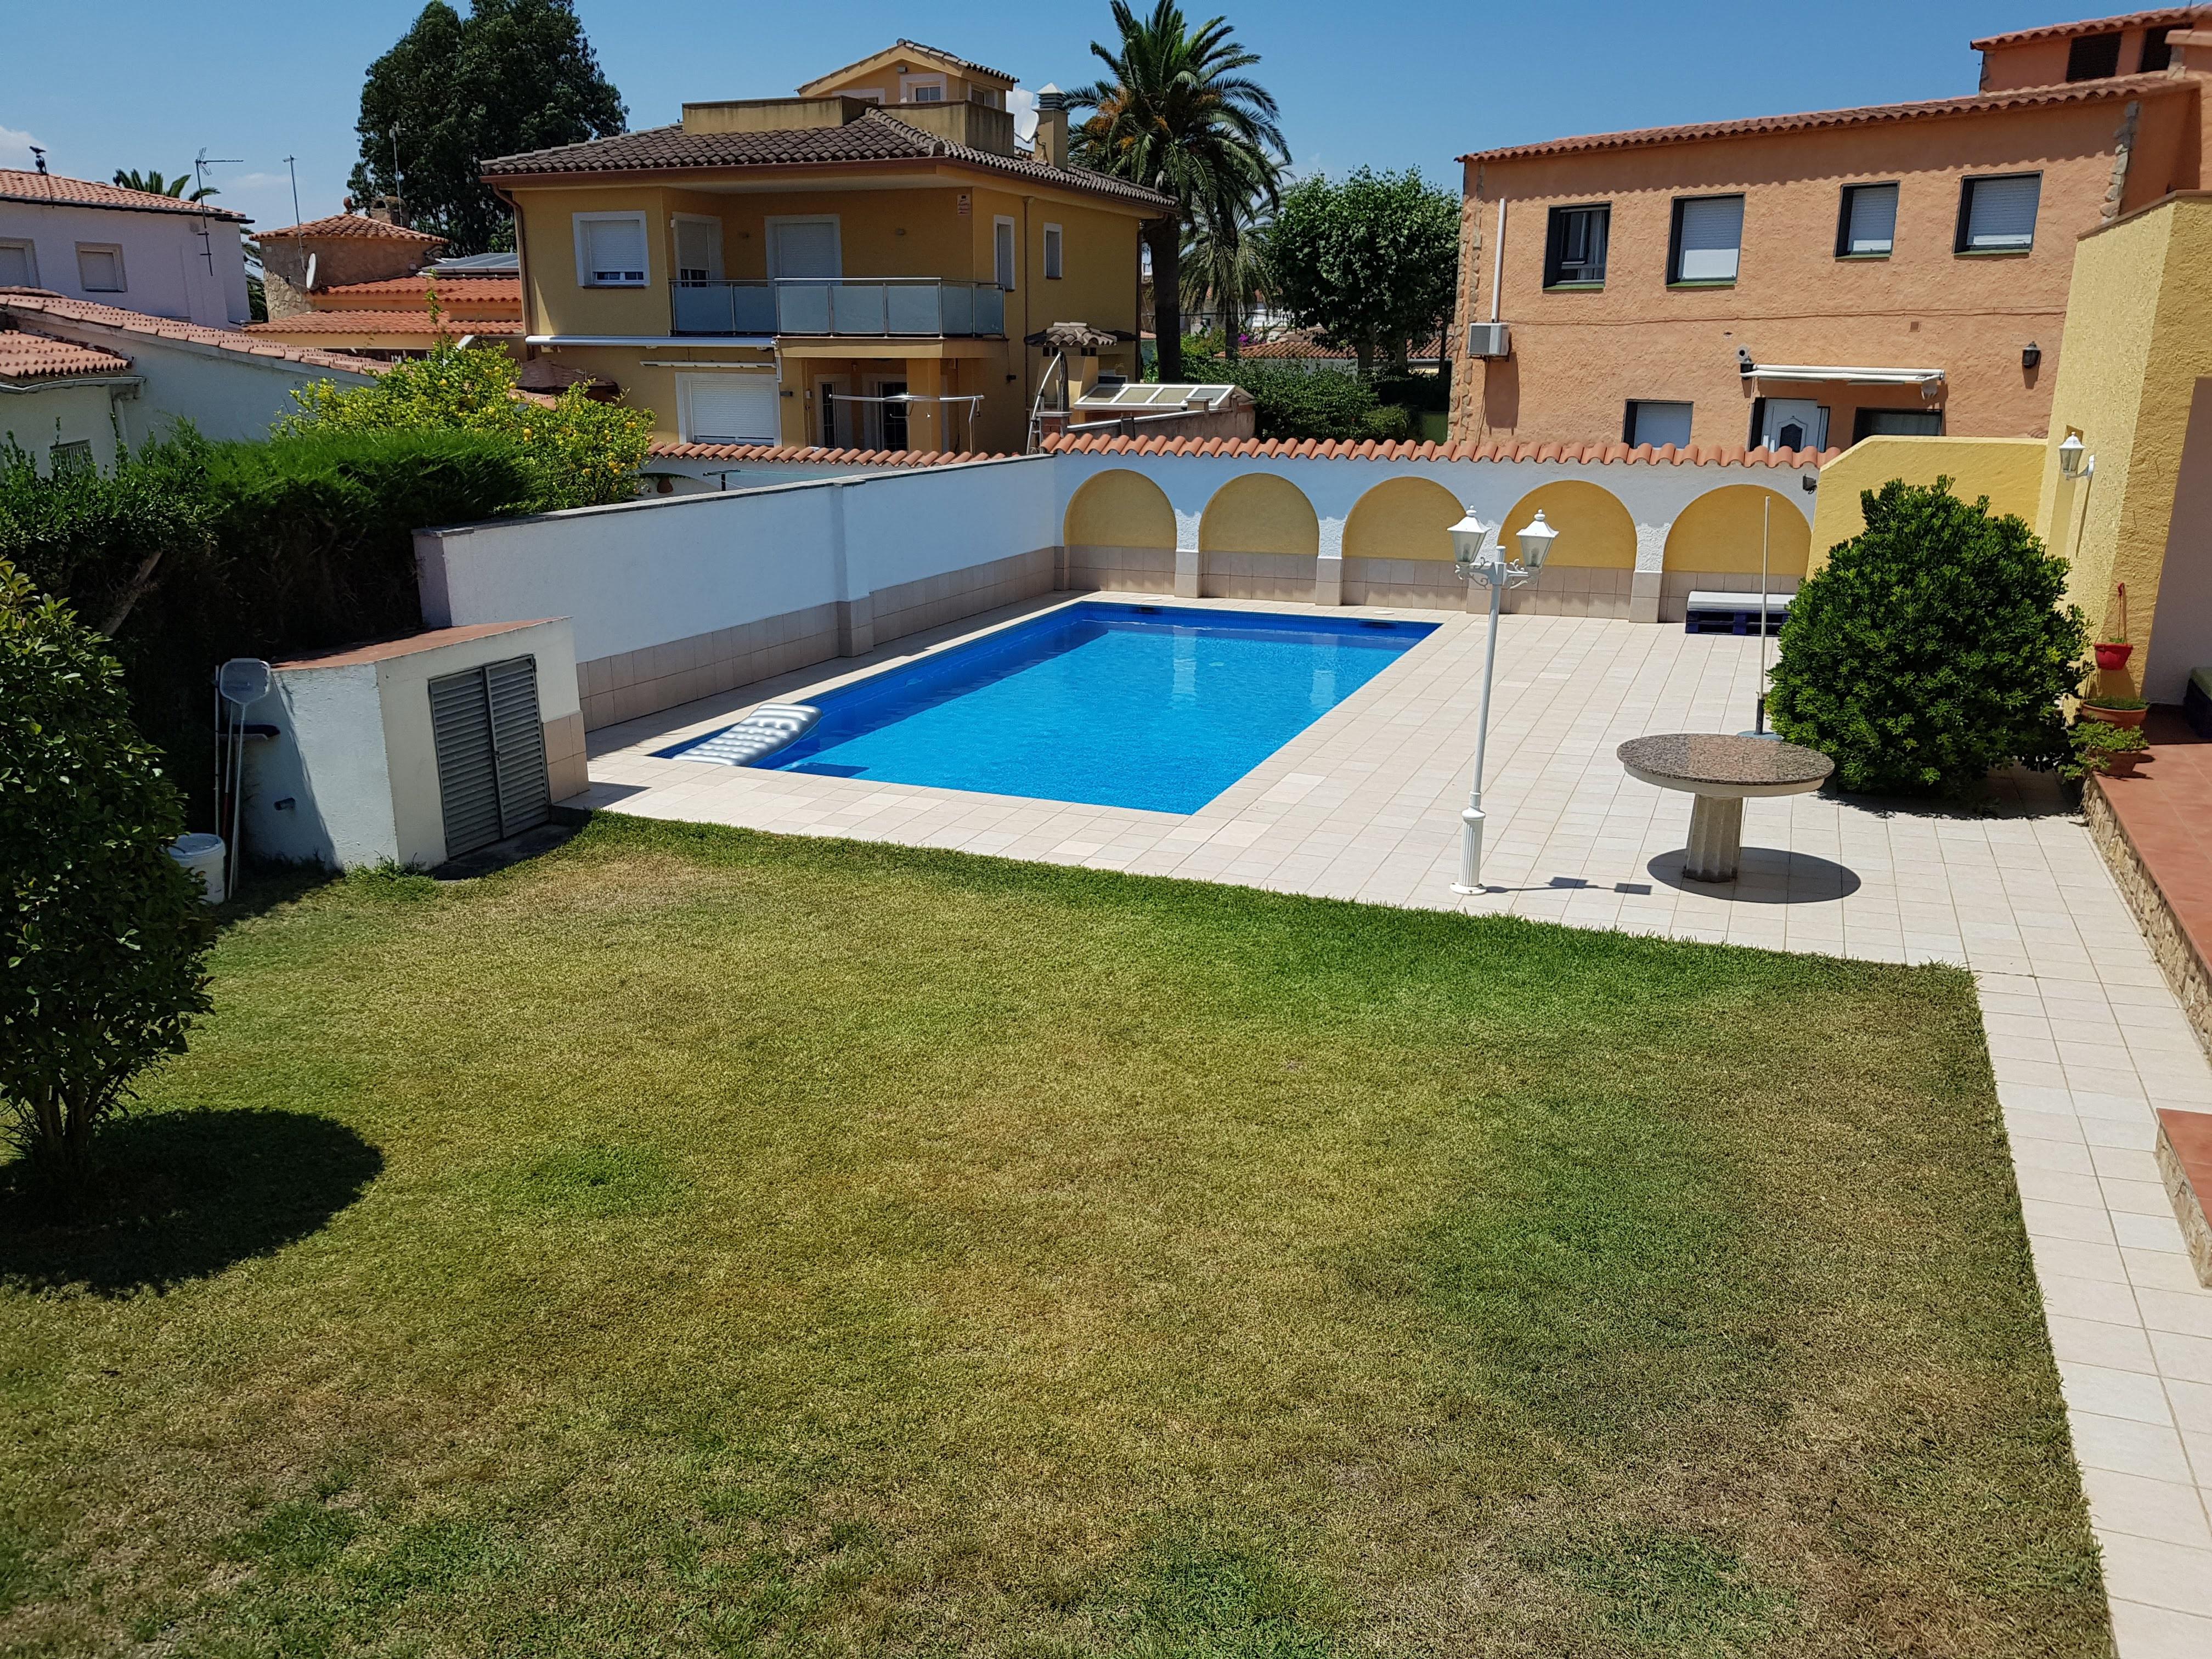 B'familiar And Friendly Property. Price For 1 Person' - Empuriabrava